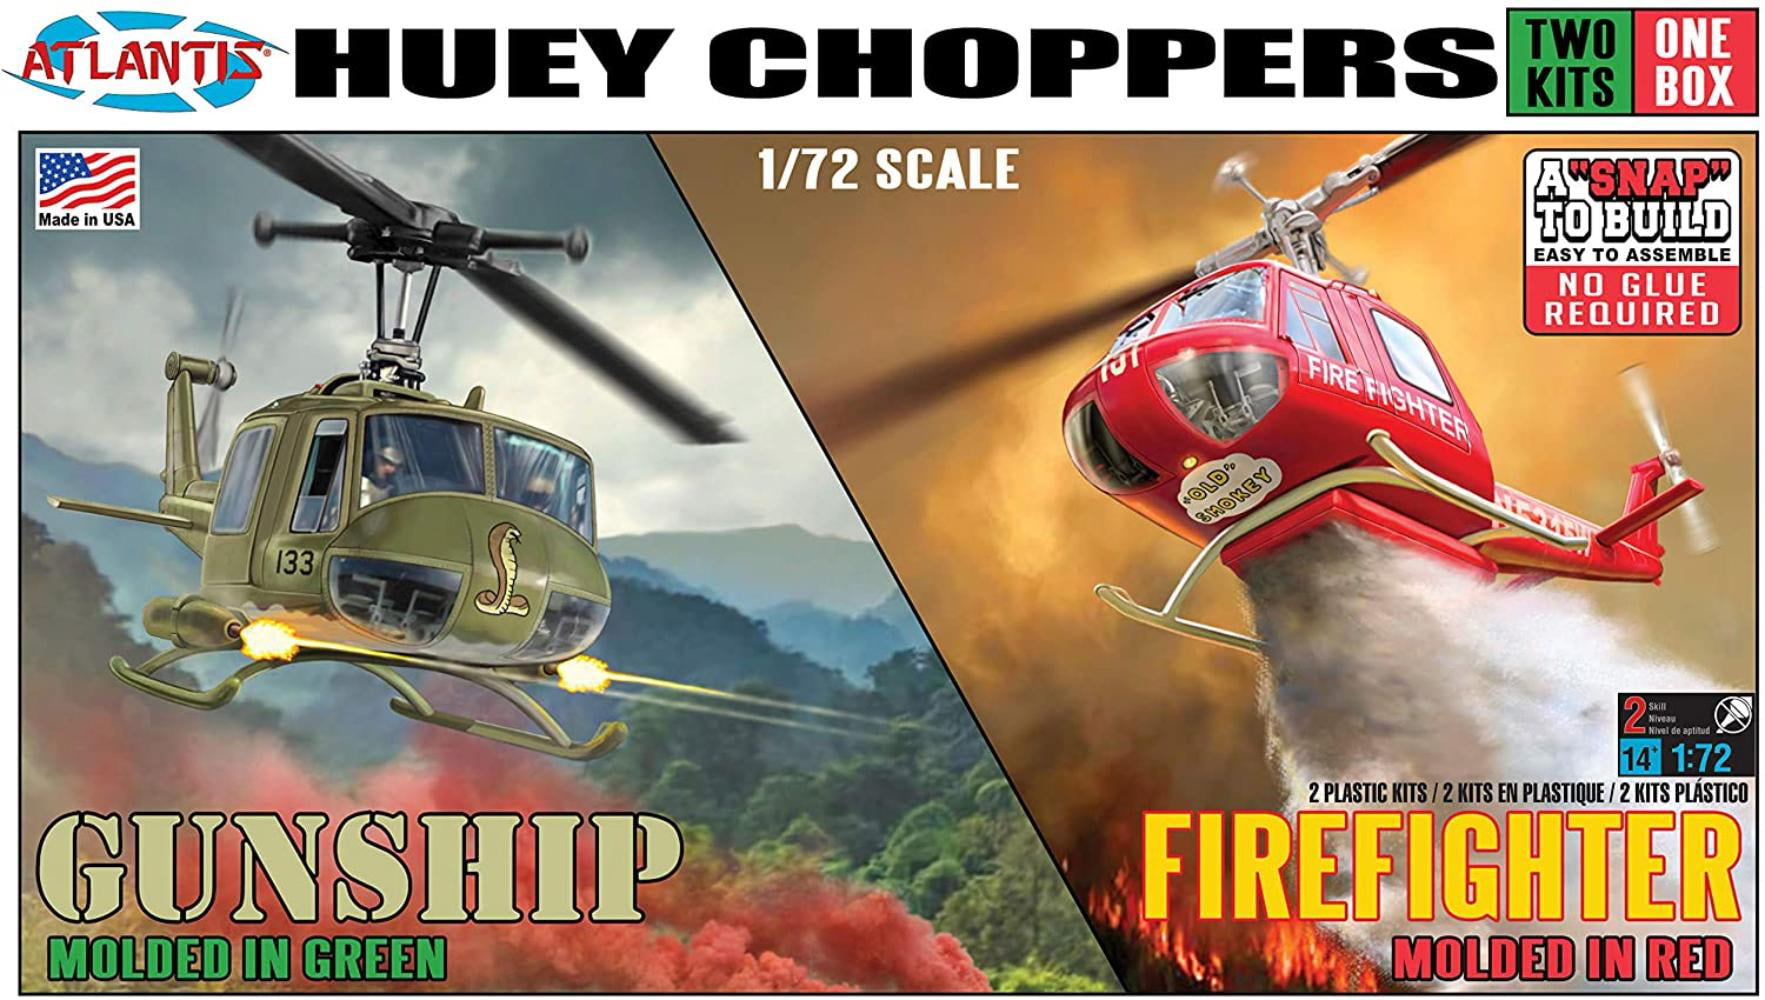 Huey Chopper 2 Pack Snap Forest Fire Rescue and Vietnam Gunship Helicopter Model Kit Atlantis, Build and be Happy! Made in the USA By Visit the Atlantis Store